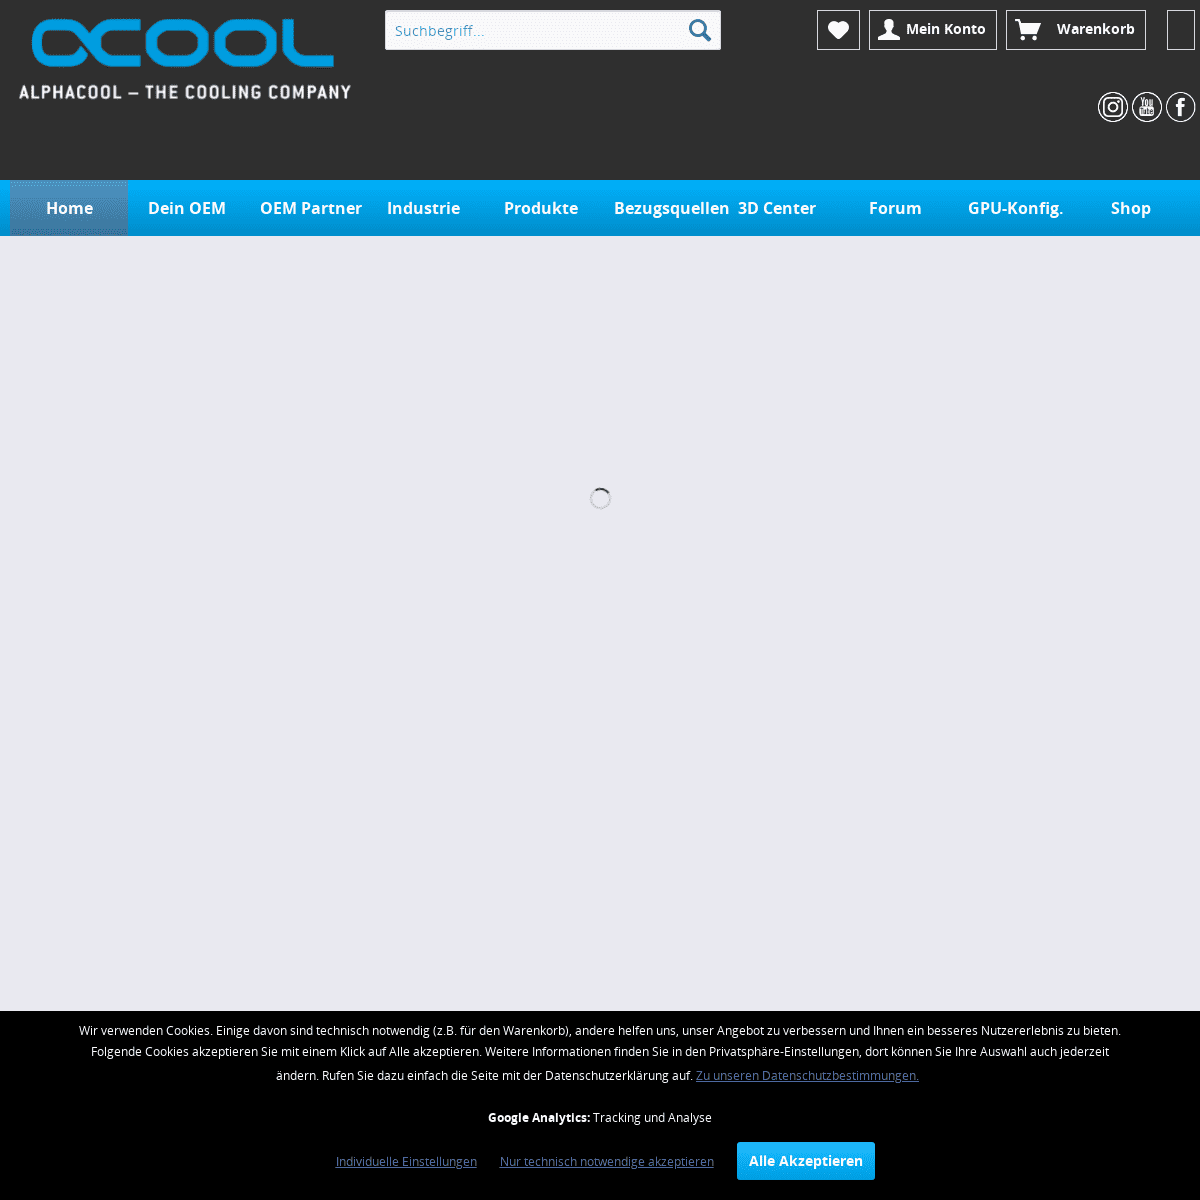 A complete backup of https://alphacool.com